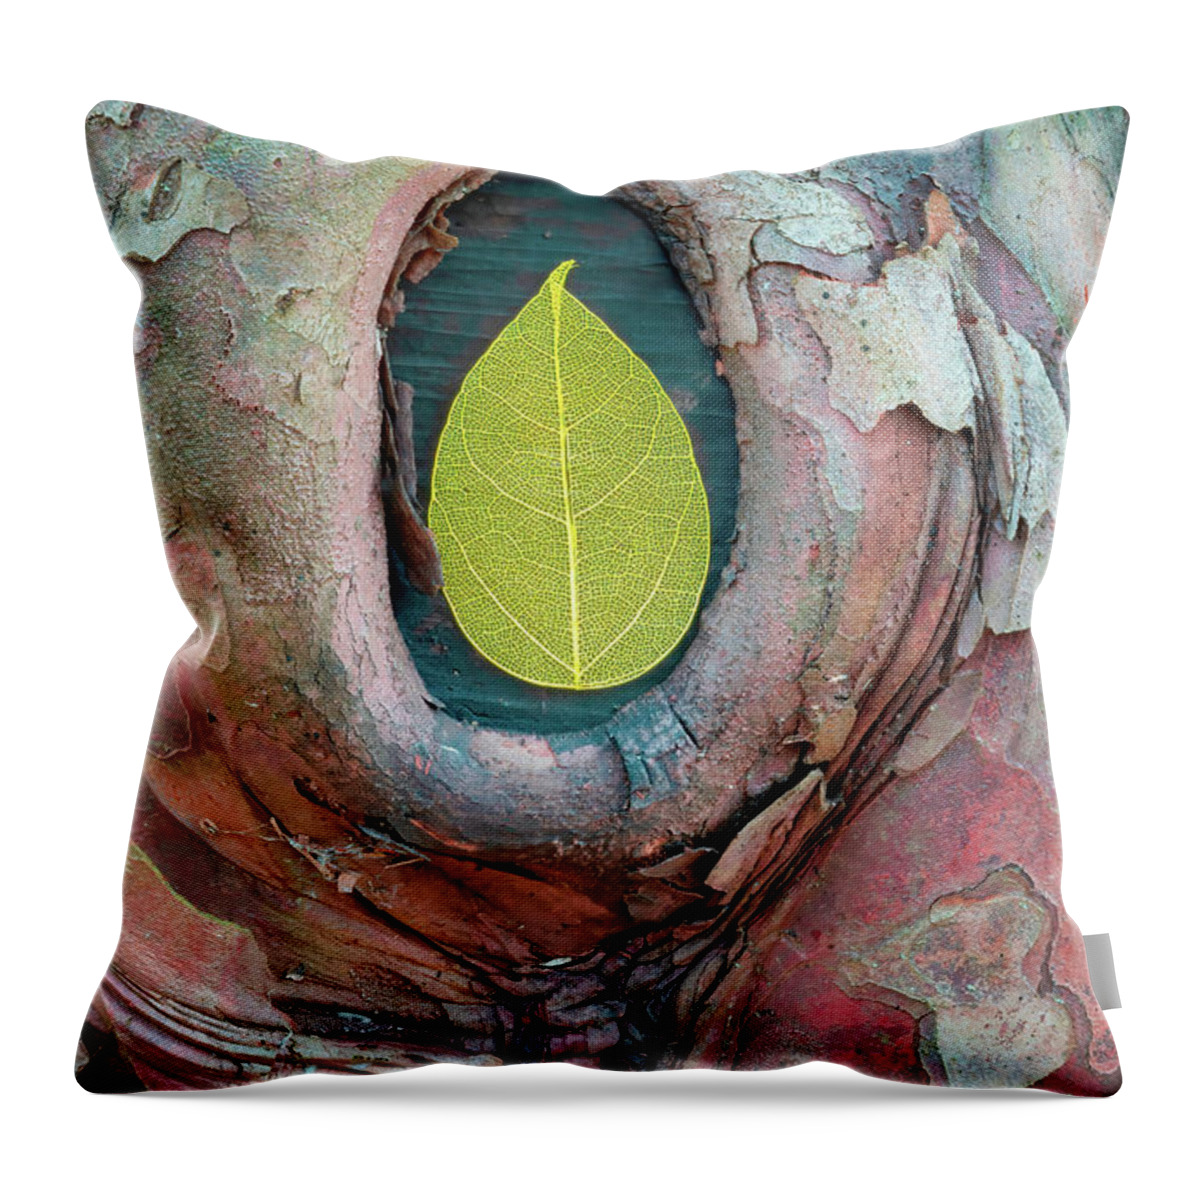 Skeleton Leaf Throw Pillow featuring the photograph Skeleton Leaf In Tree Bark by Gary Slawsky